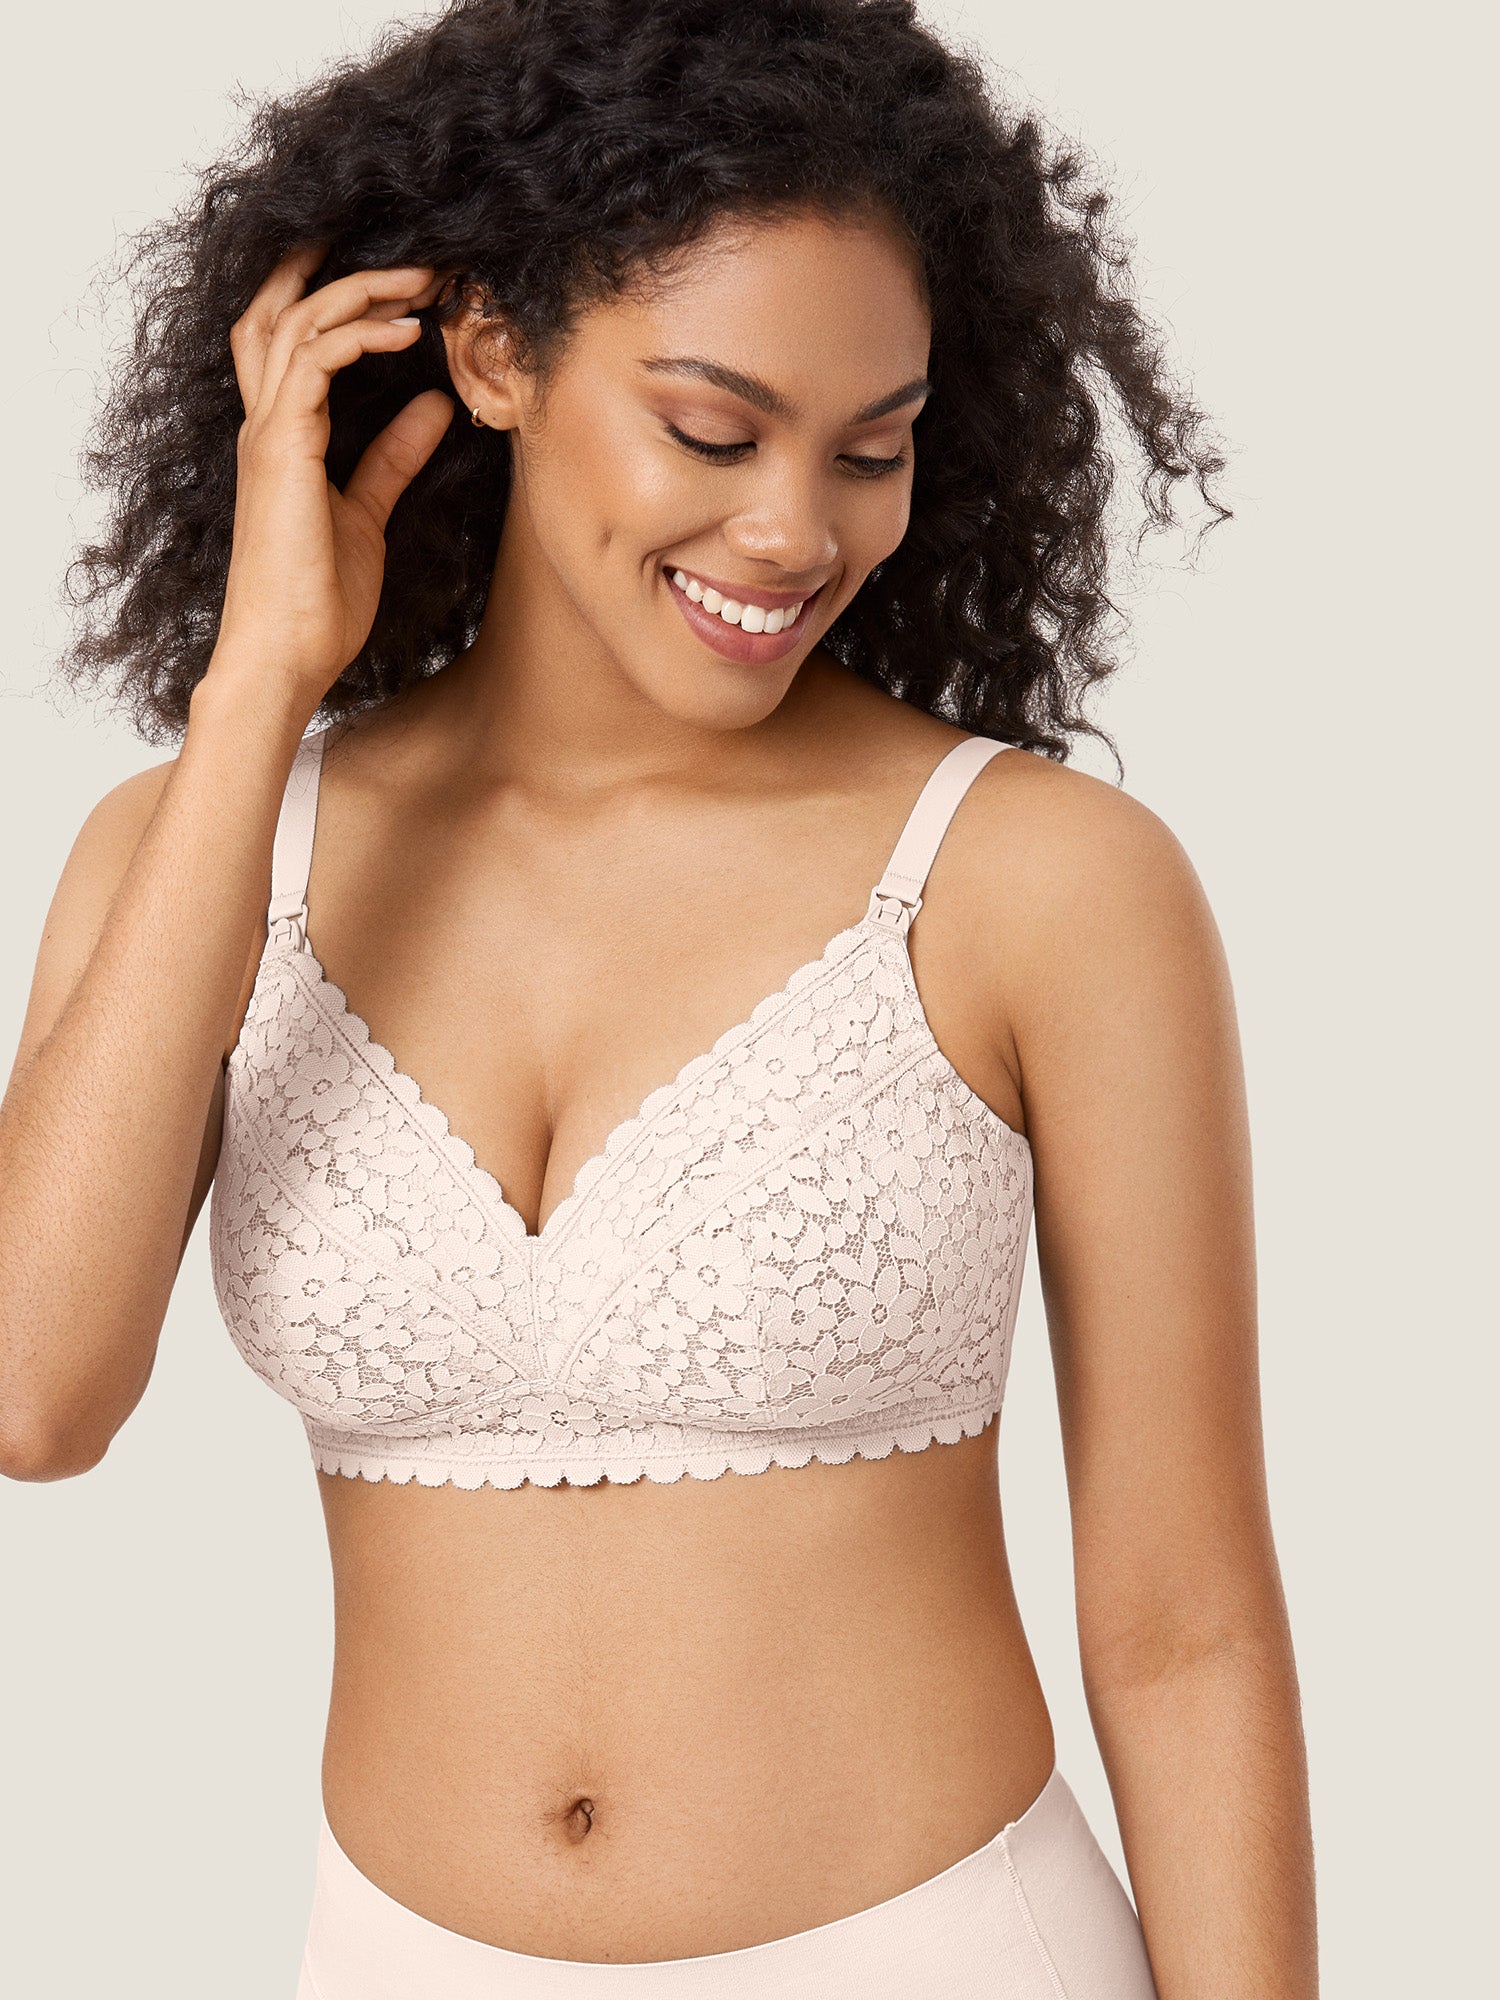 Lace Hands Free Pumping Bra Rose White